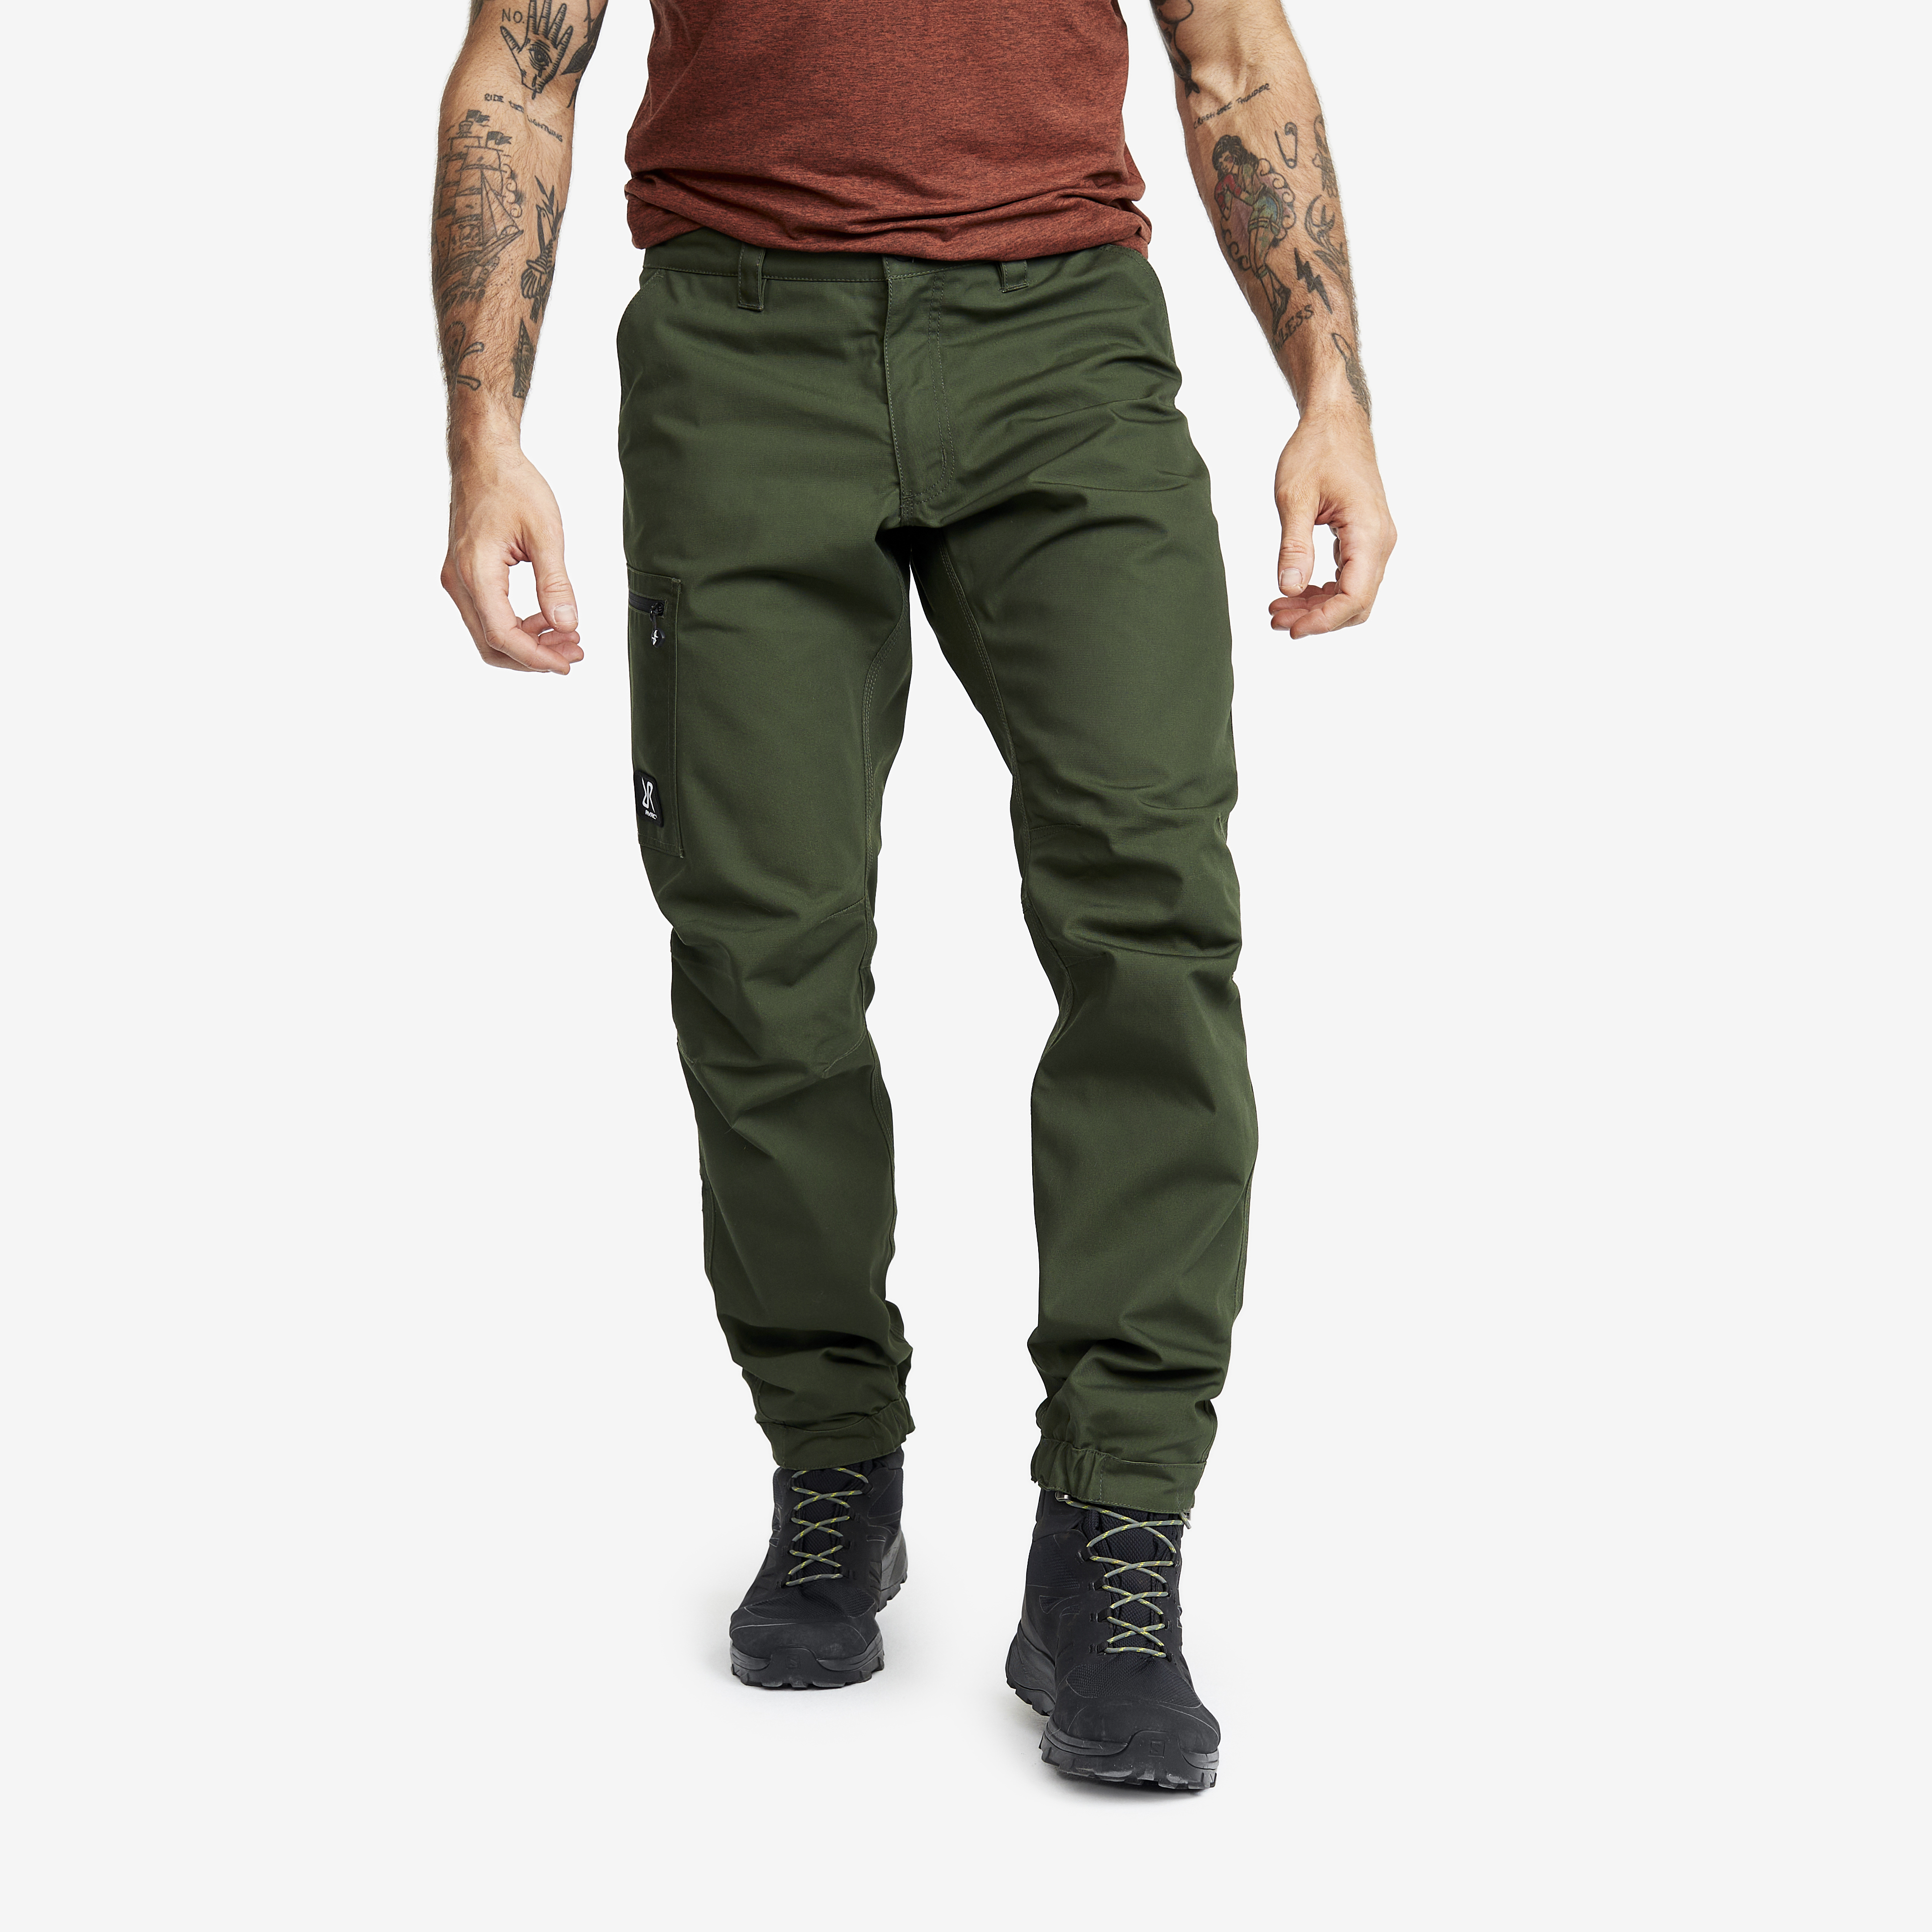 Go Green: How I'm Wearing J. Crew's Sustainable Cargo Pants - The